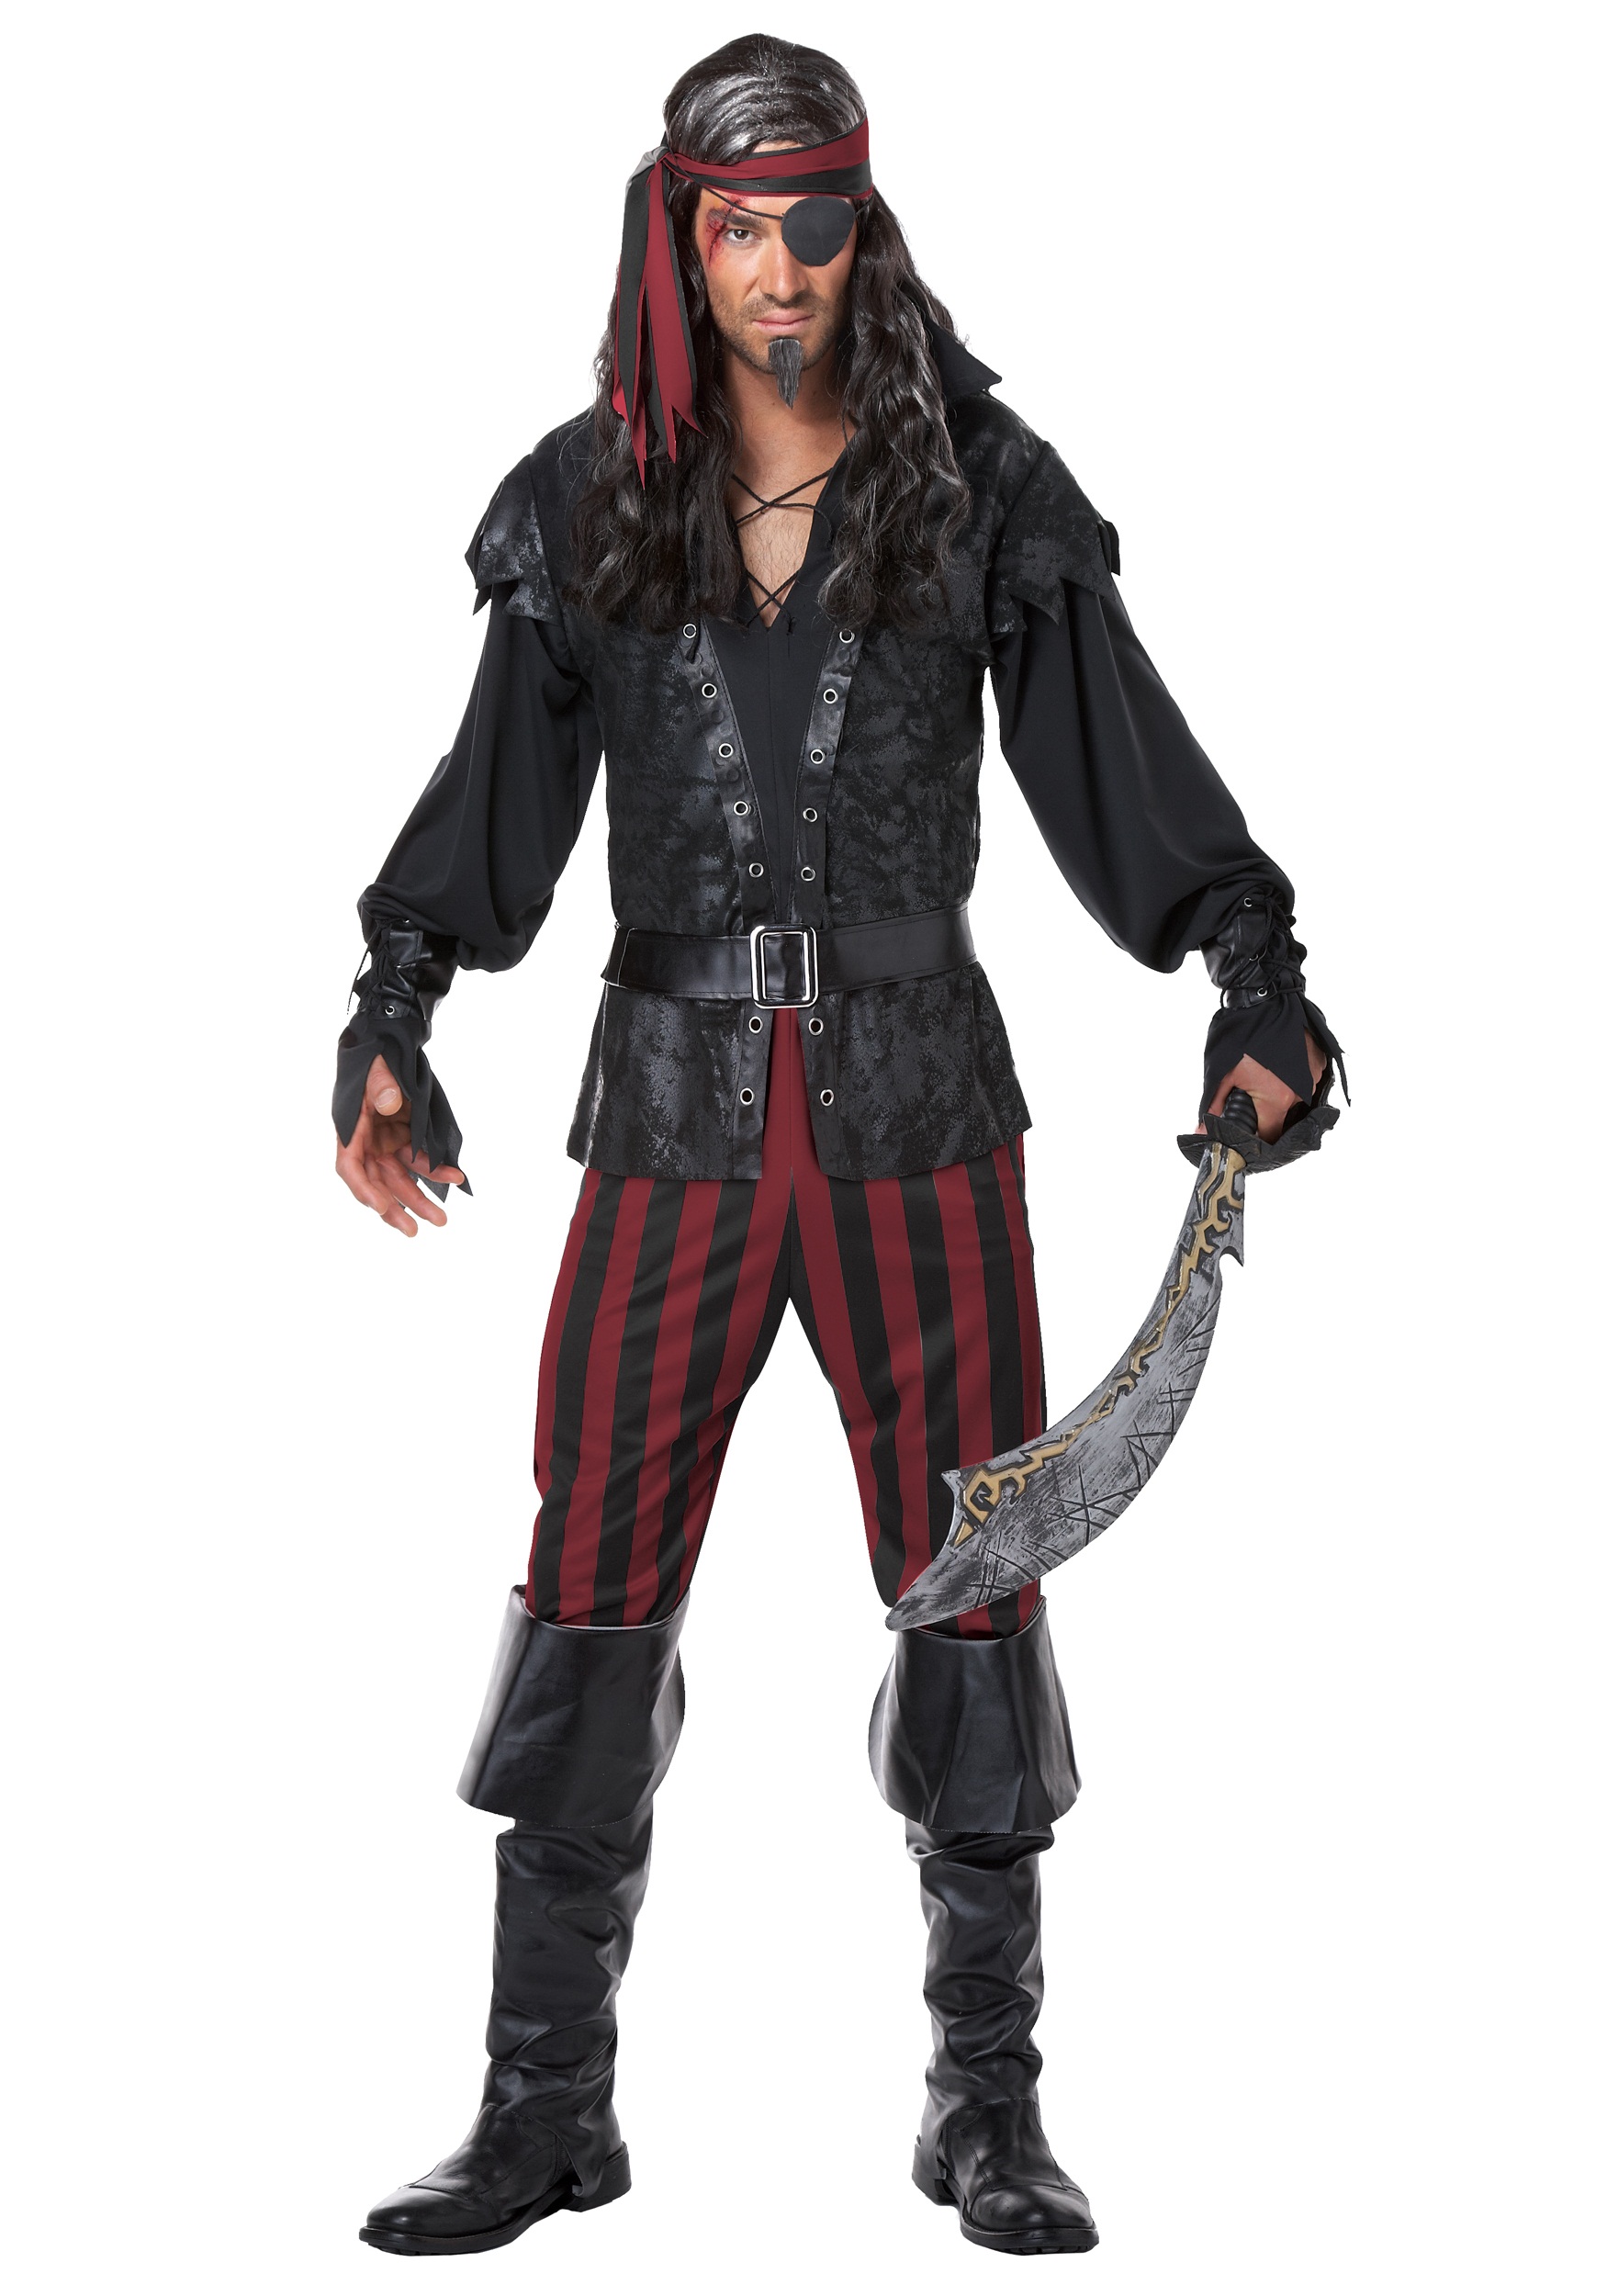 Photos - Fancy Dress California Costume Collection Ruthless Rogue Pirate Costume for Men Black& 